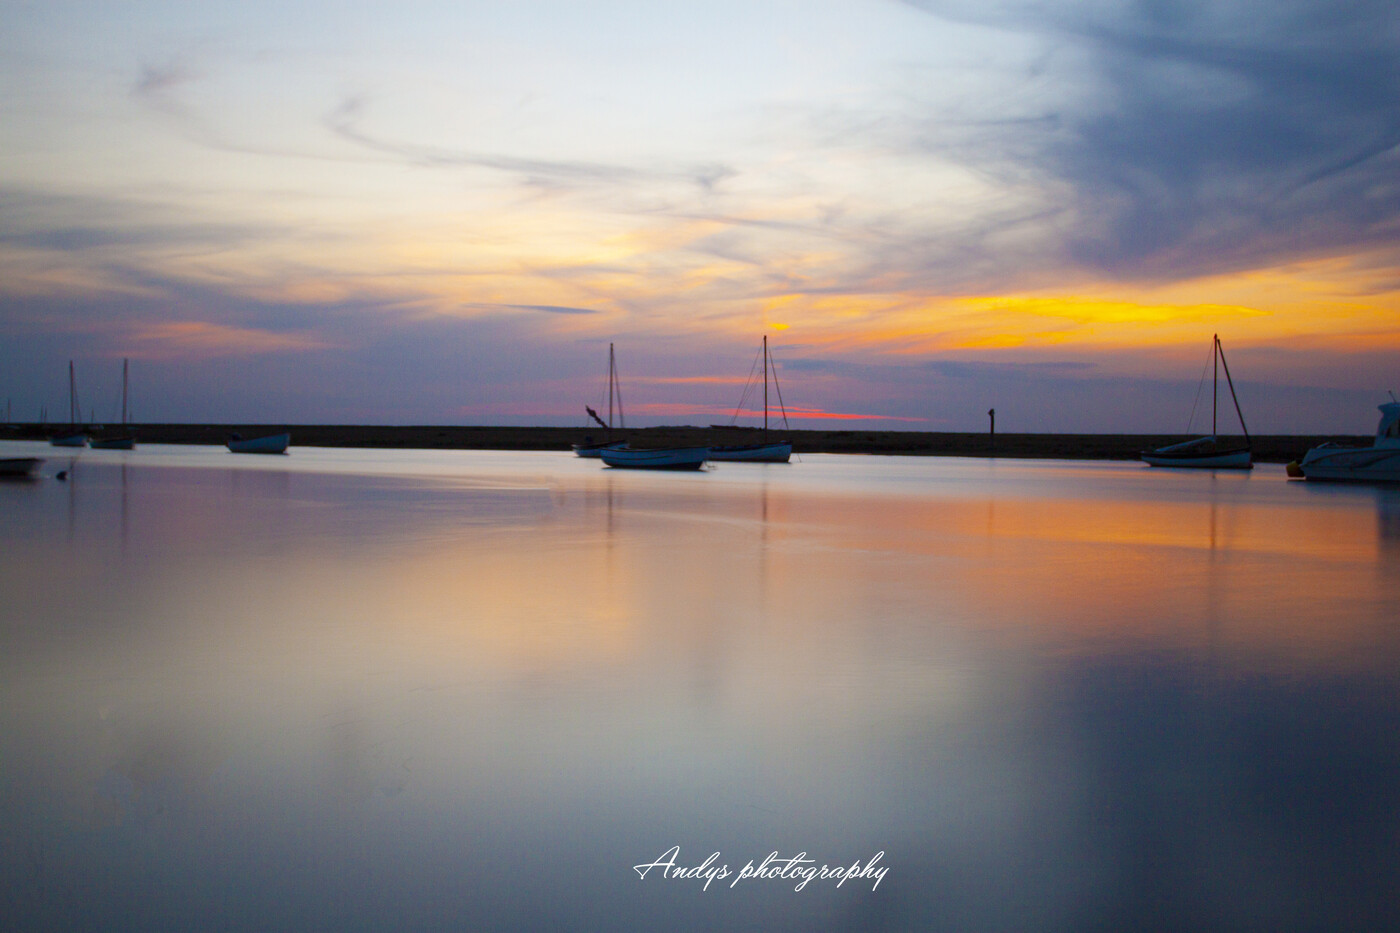 photographer andys photography long exposure  photo taken at Burnham overy staithe